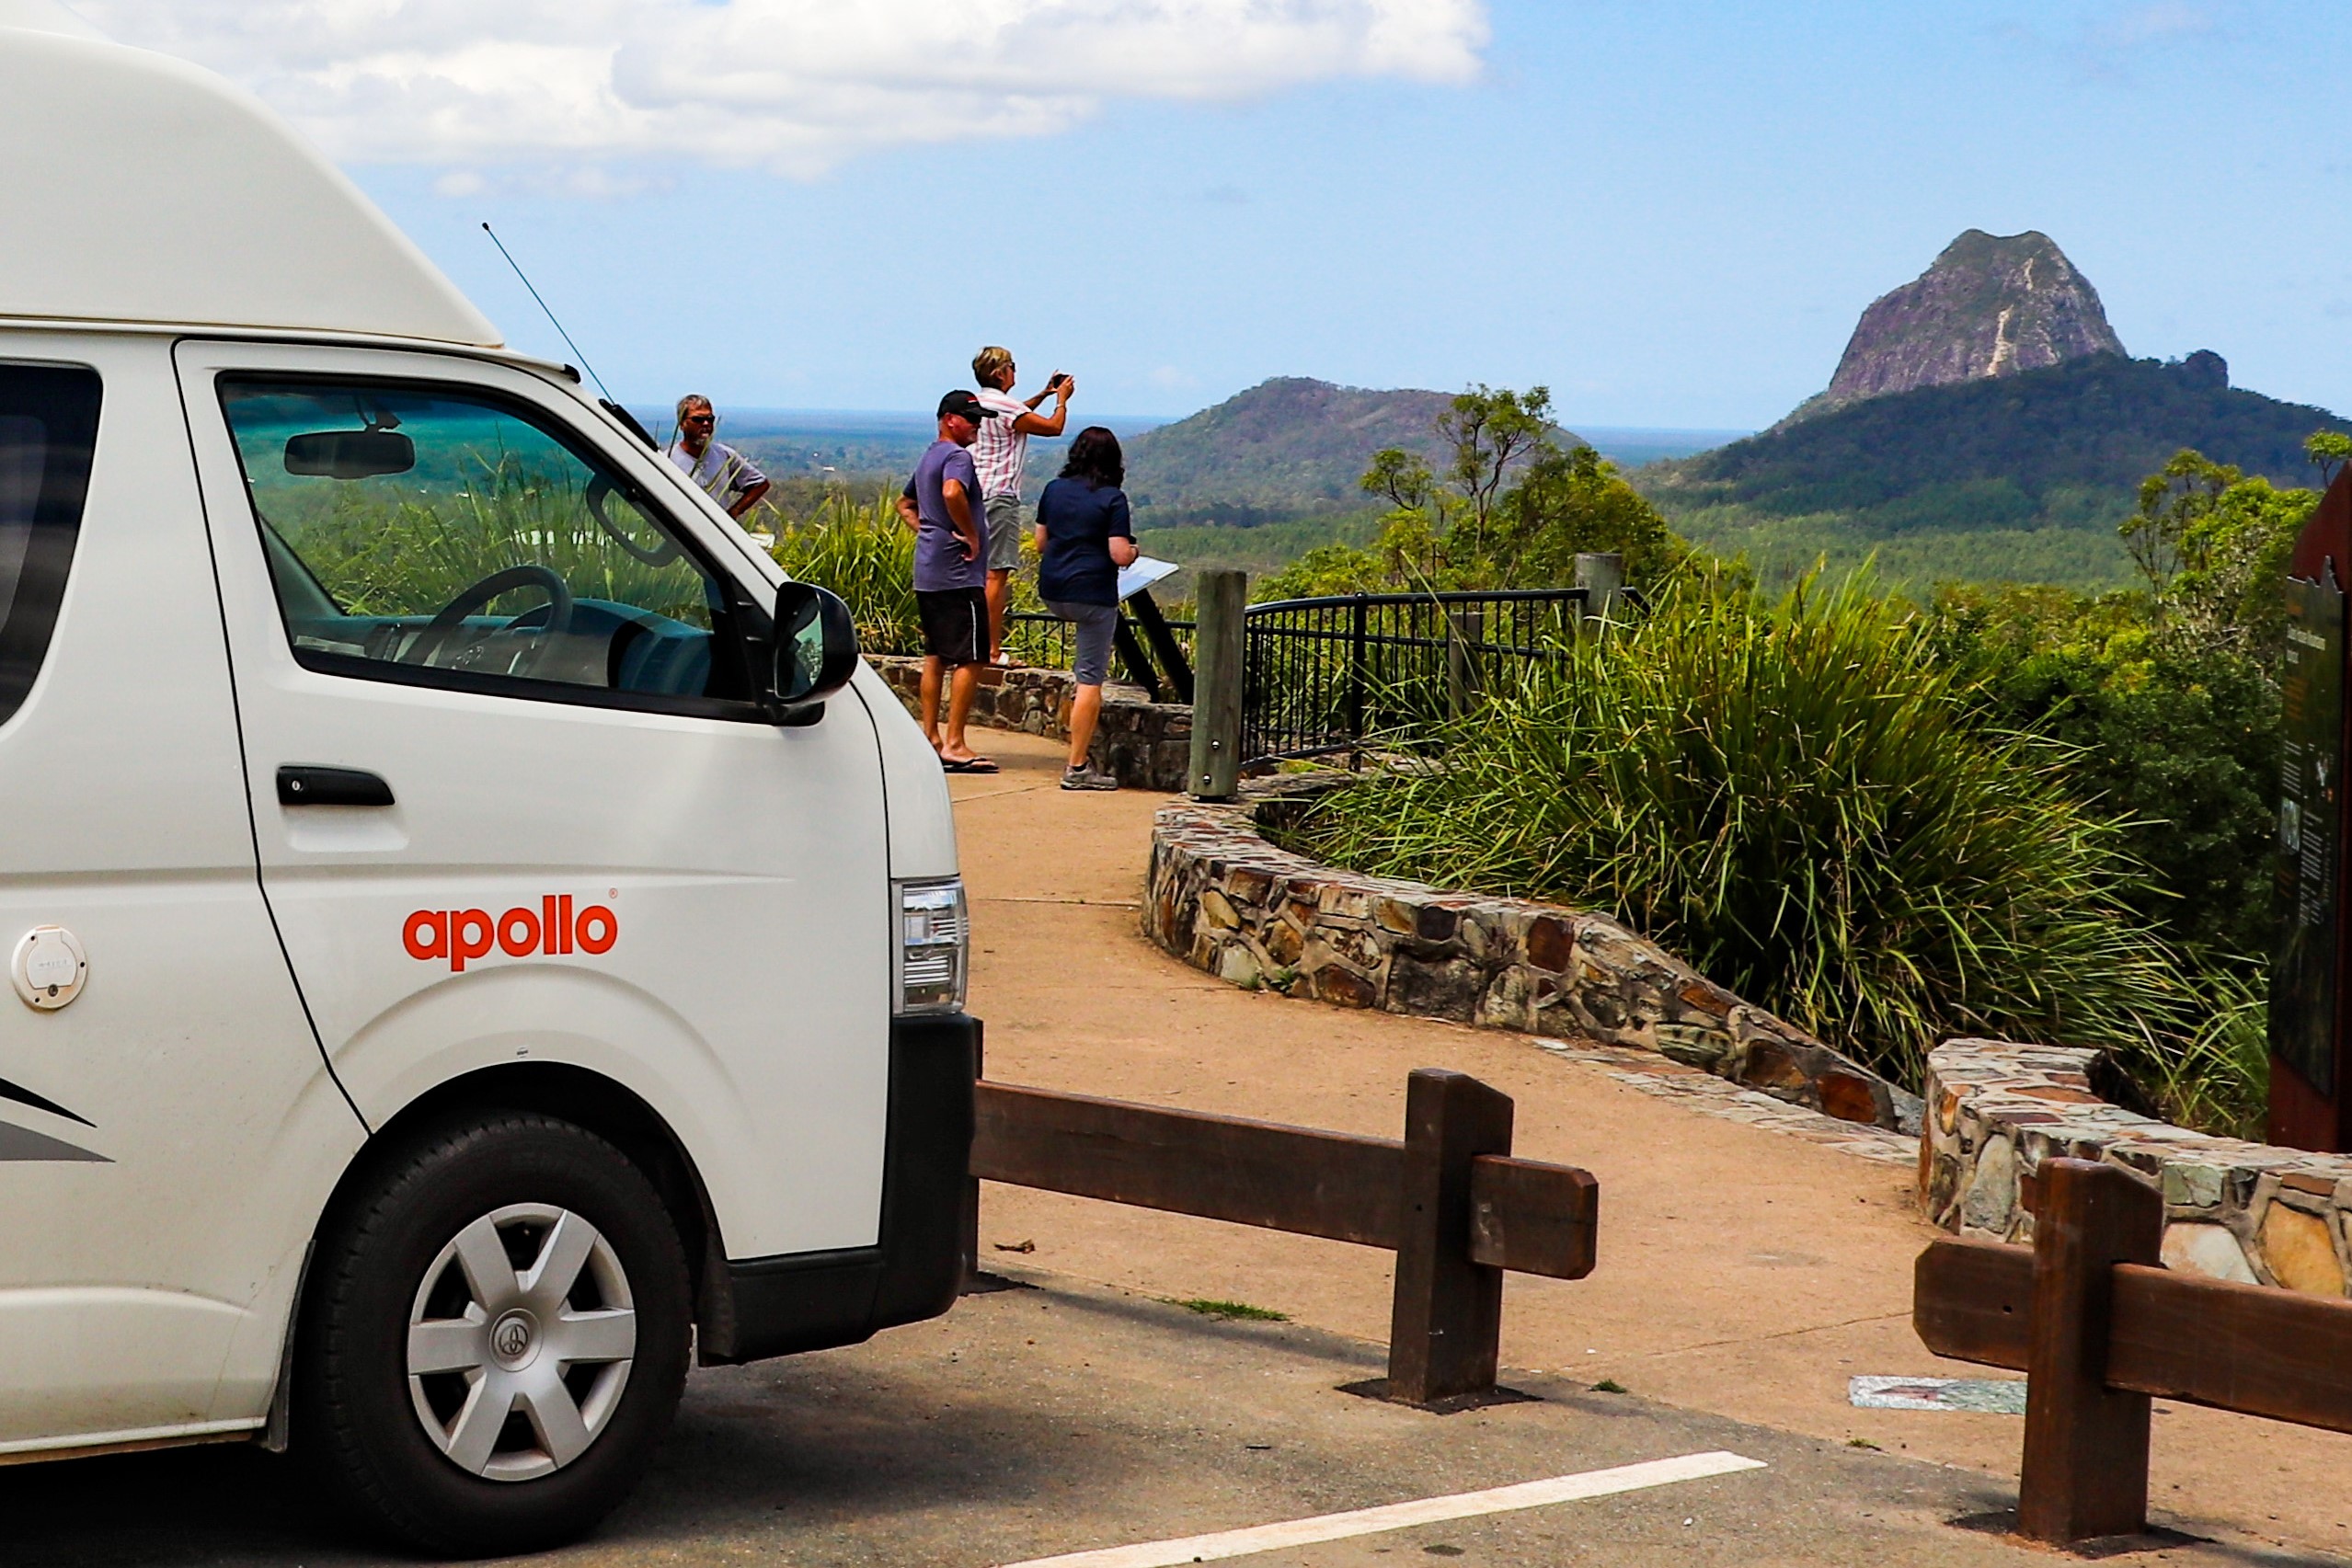 Apollo campervan parked at Glass House Mountains viewpoint Sunshine Coast